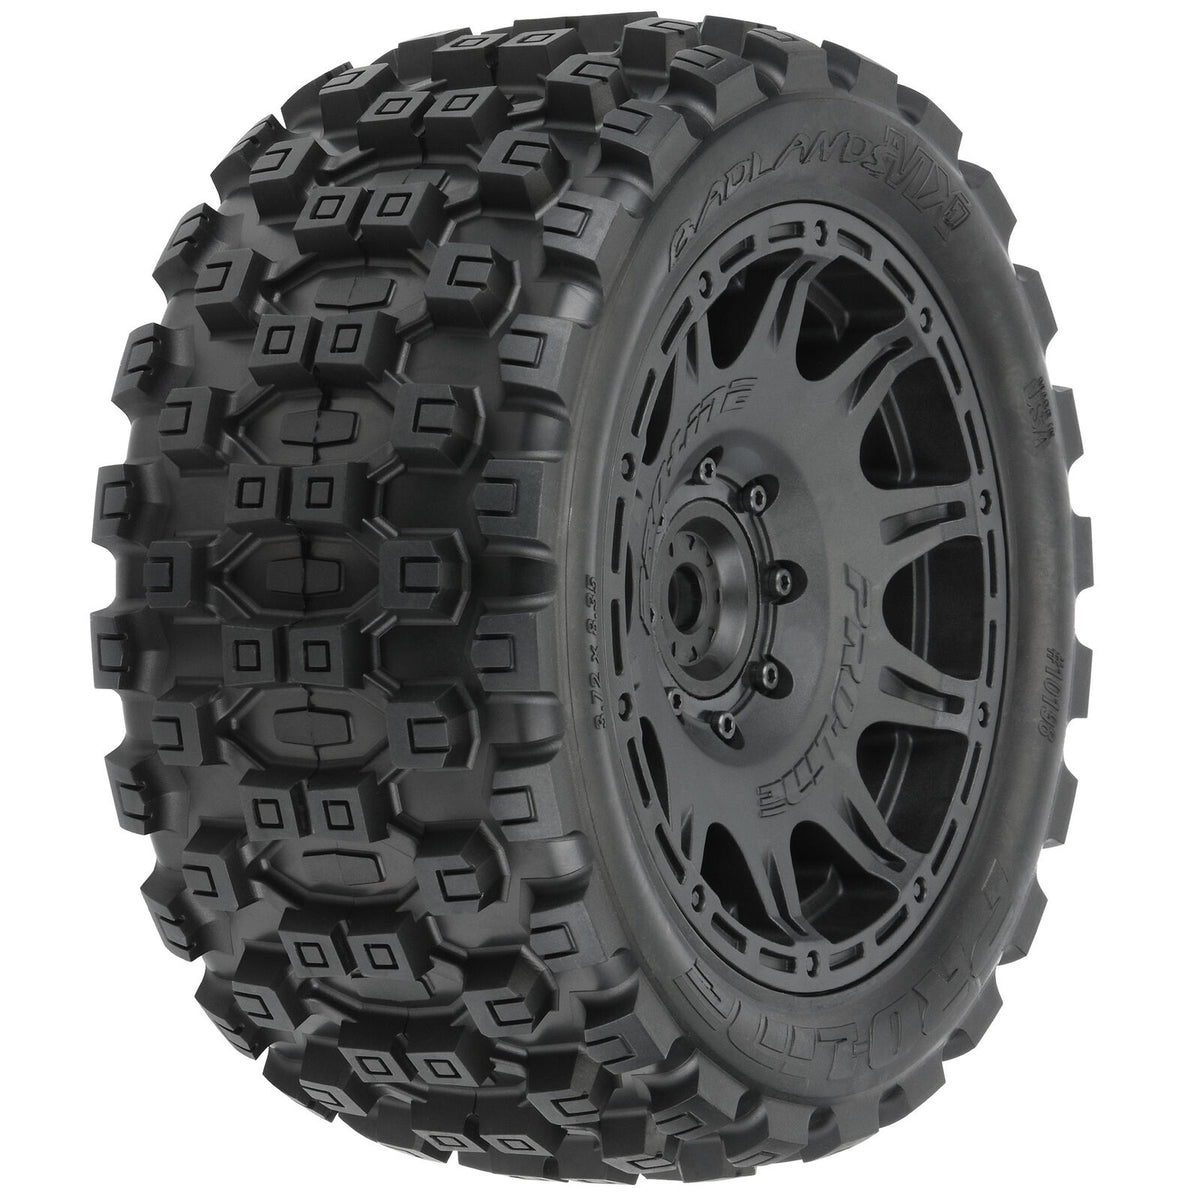 1/6 Badlands MX57 Front/Rear 5.7” Tires Mounted on Raid 8x48 Removable 24mm Hex Wheels (2): Black - PRO1019811